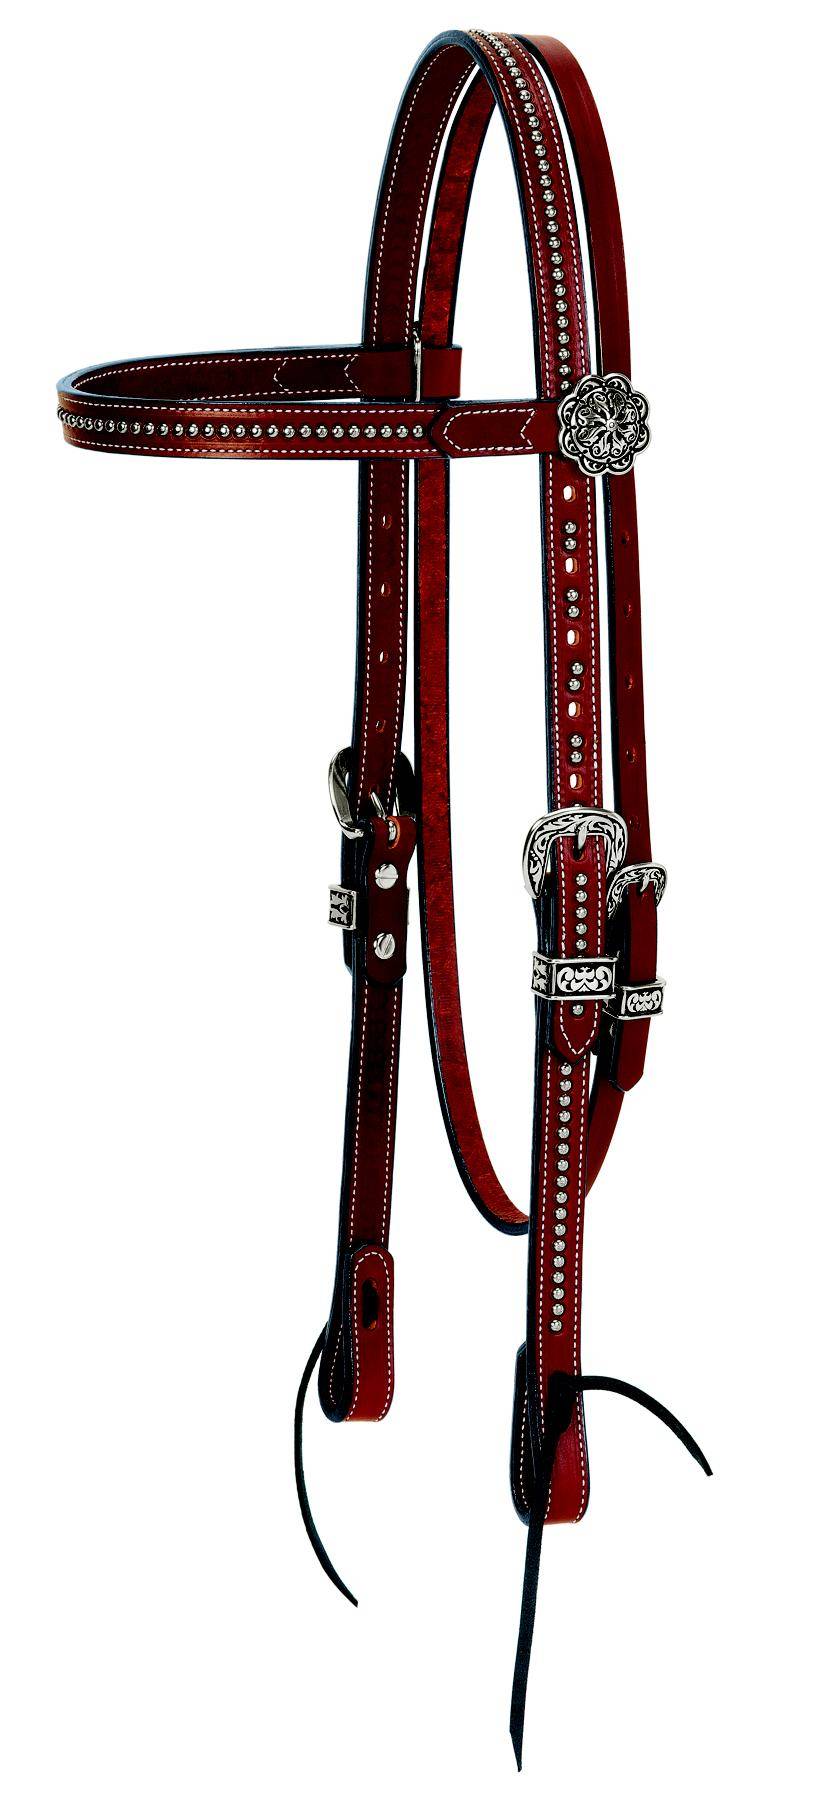 Weaver Leather Austin Browband Headstall